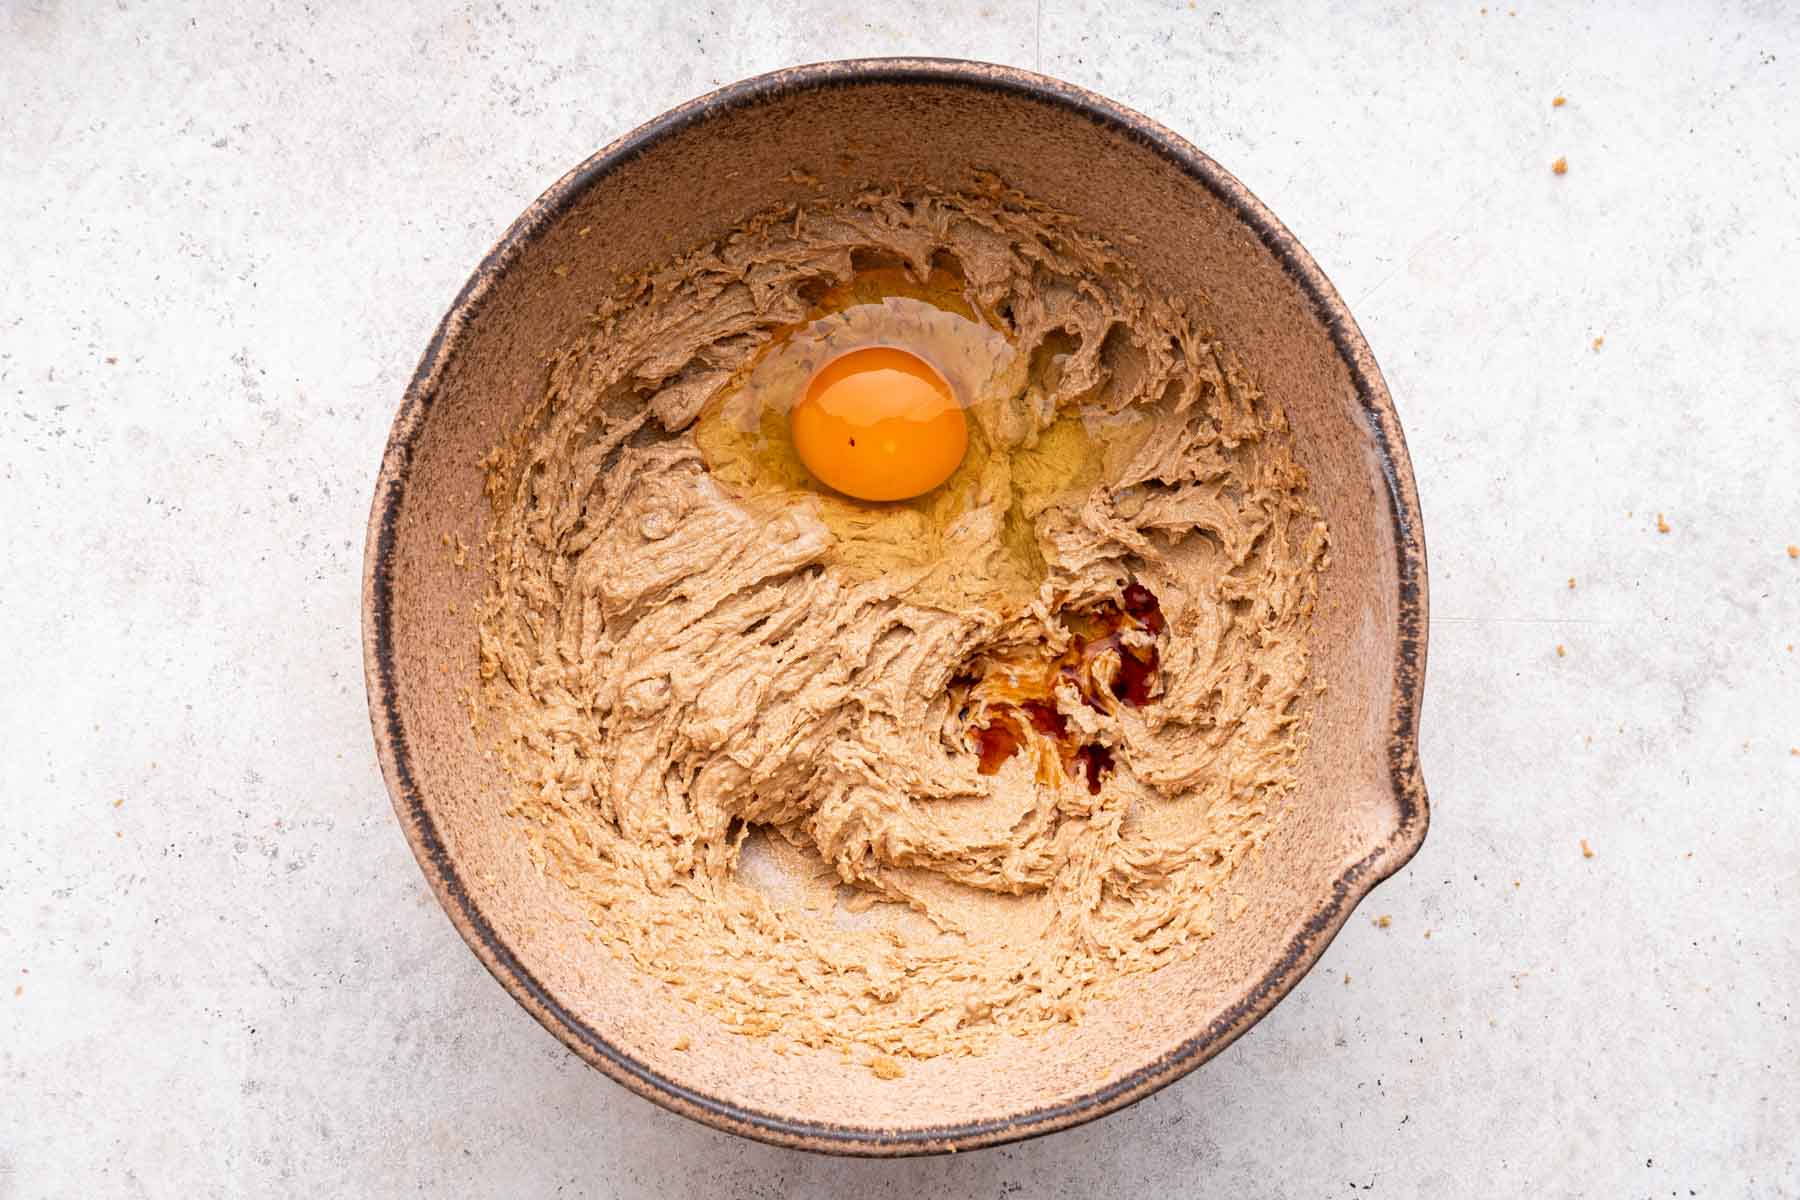 Egg yolk and vanilla in brown dough in a brown mixing bowl.